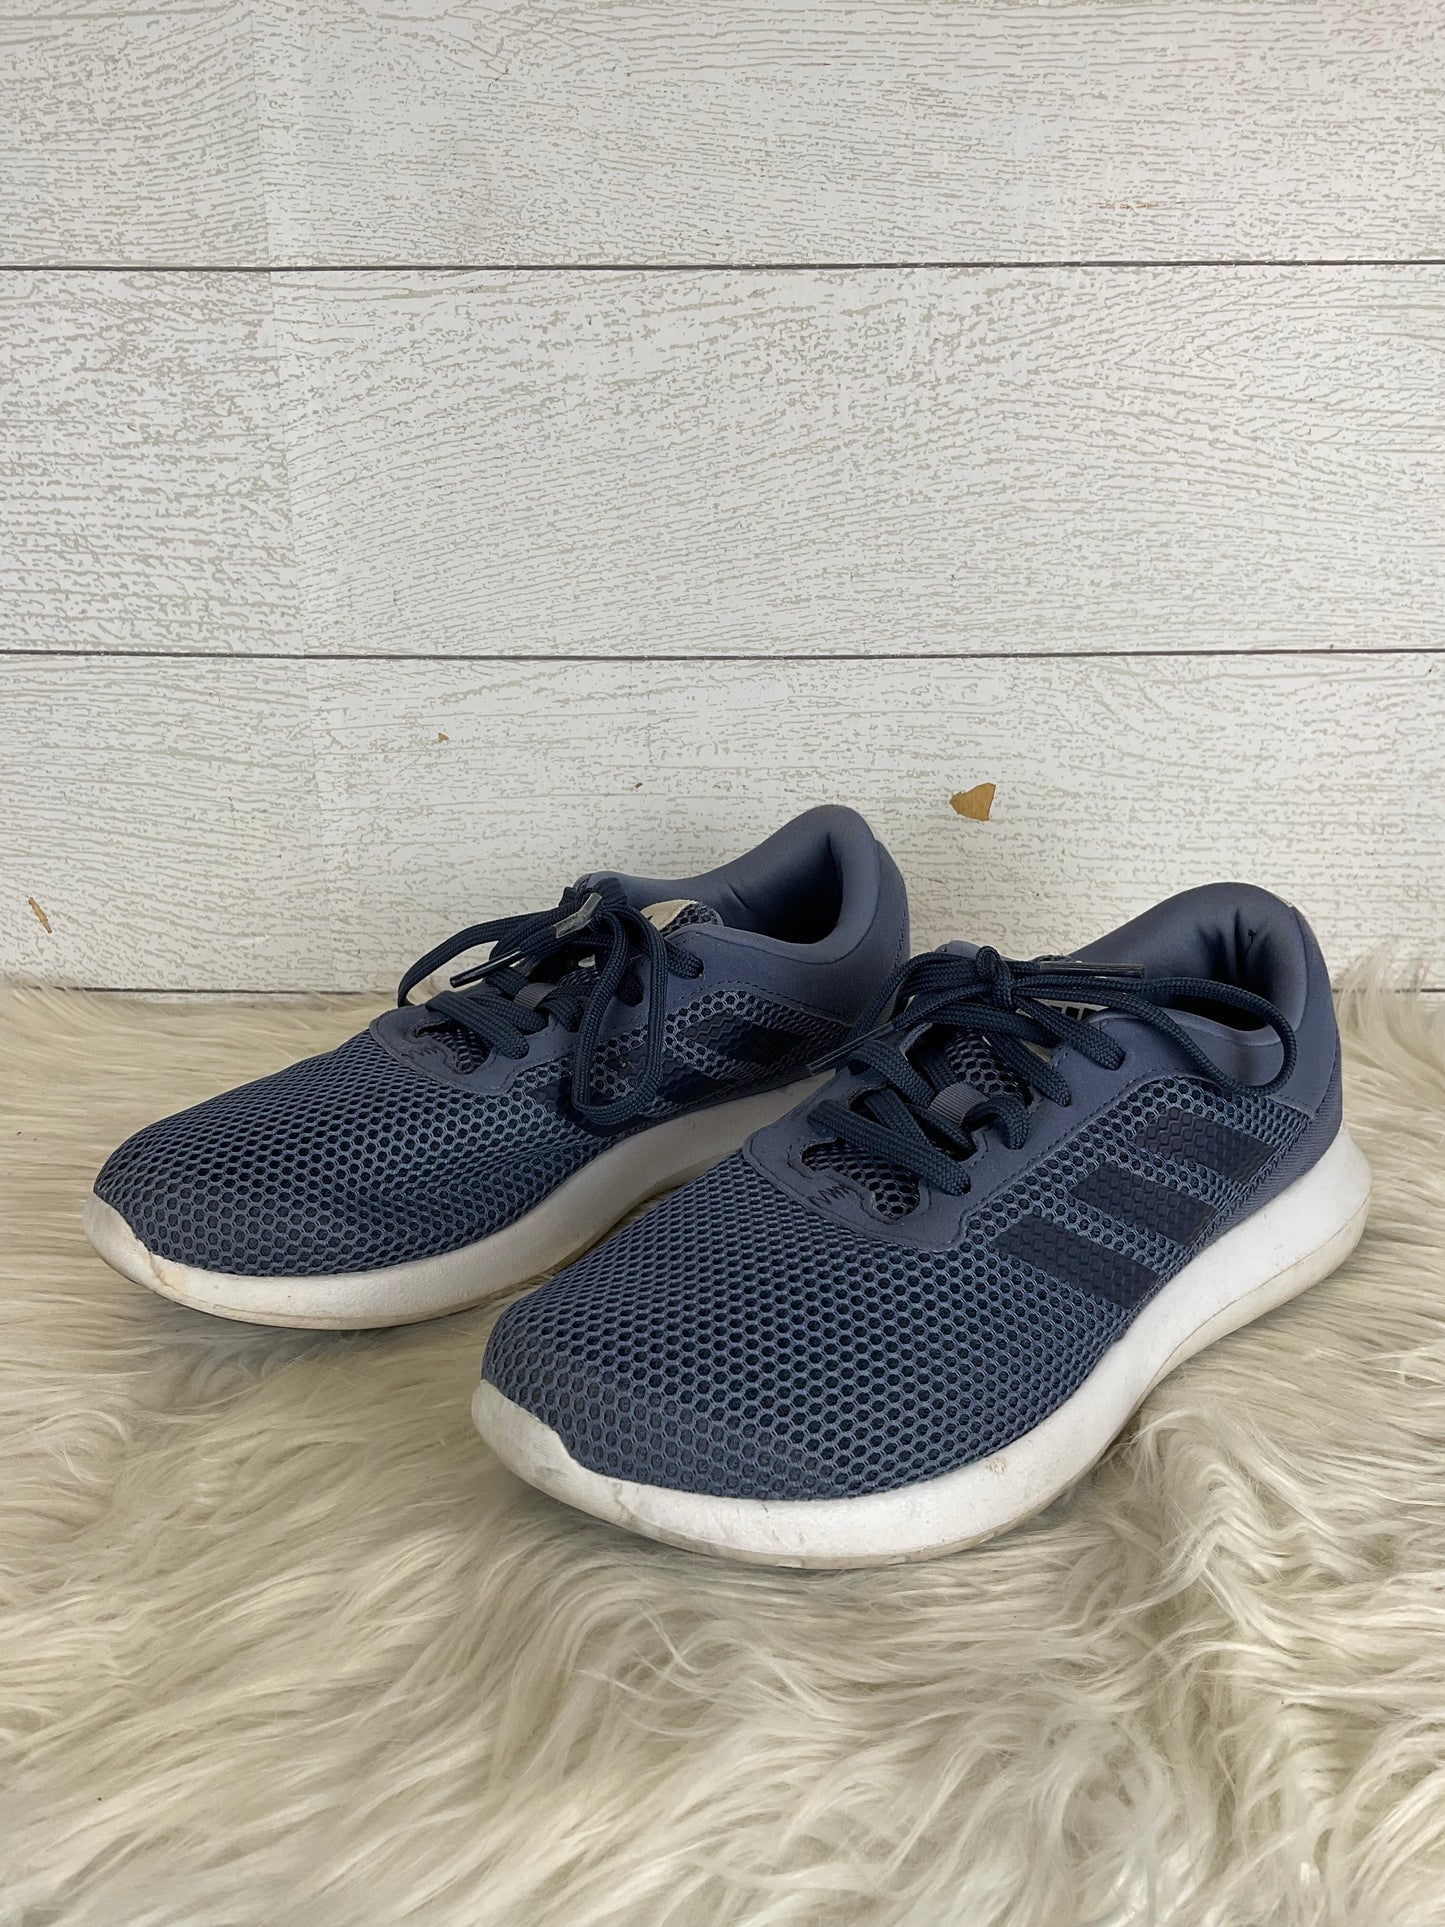 Shoes Athletic By Adidas  Size: 8.5